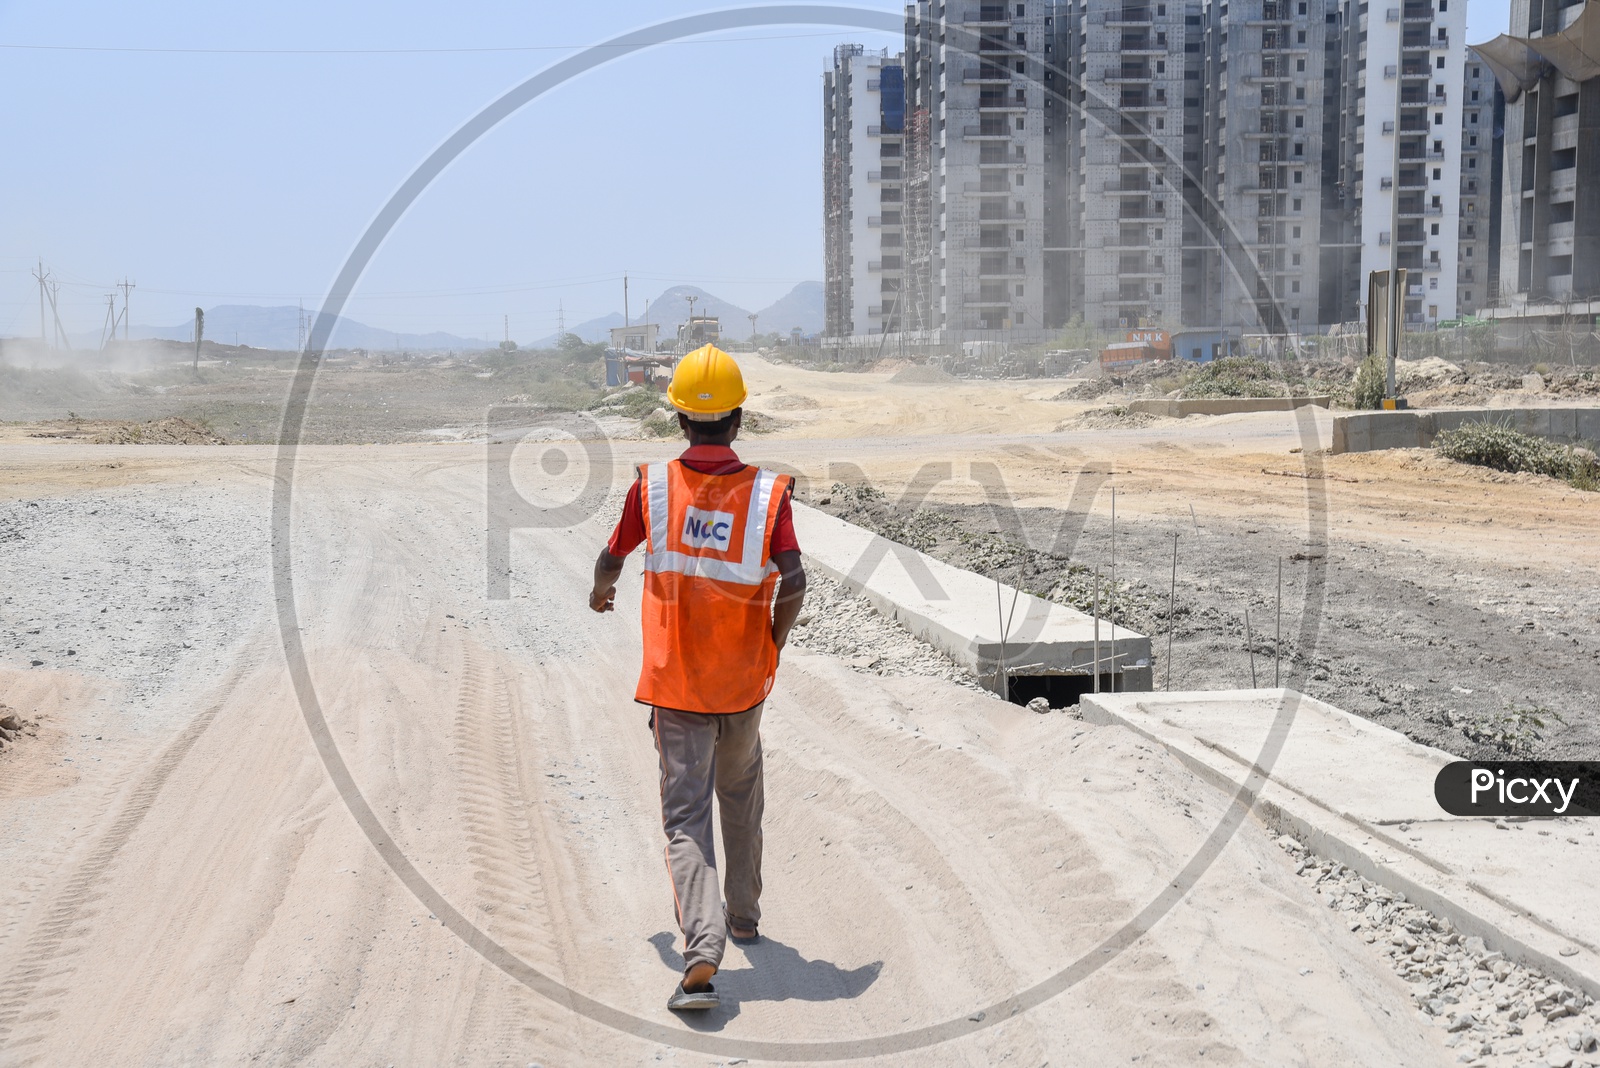 Construction Workers Wearing Safety Helmets And Reflective Safety Vests At Construction Sites